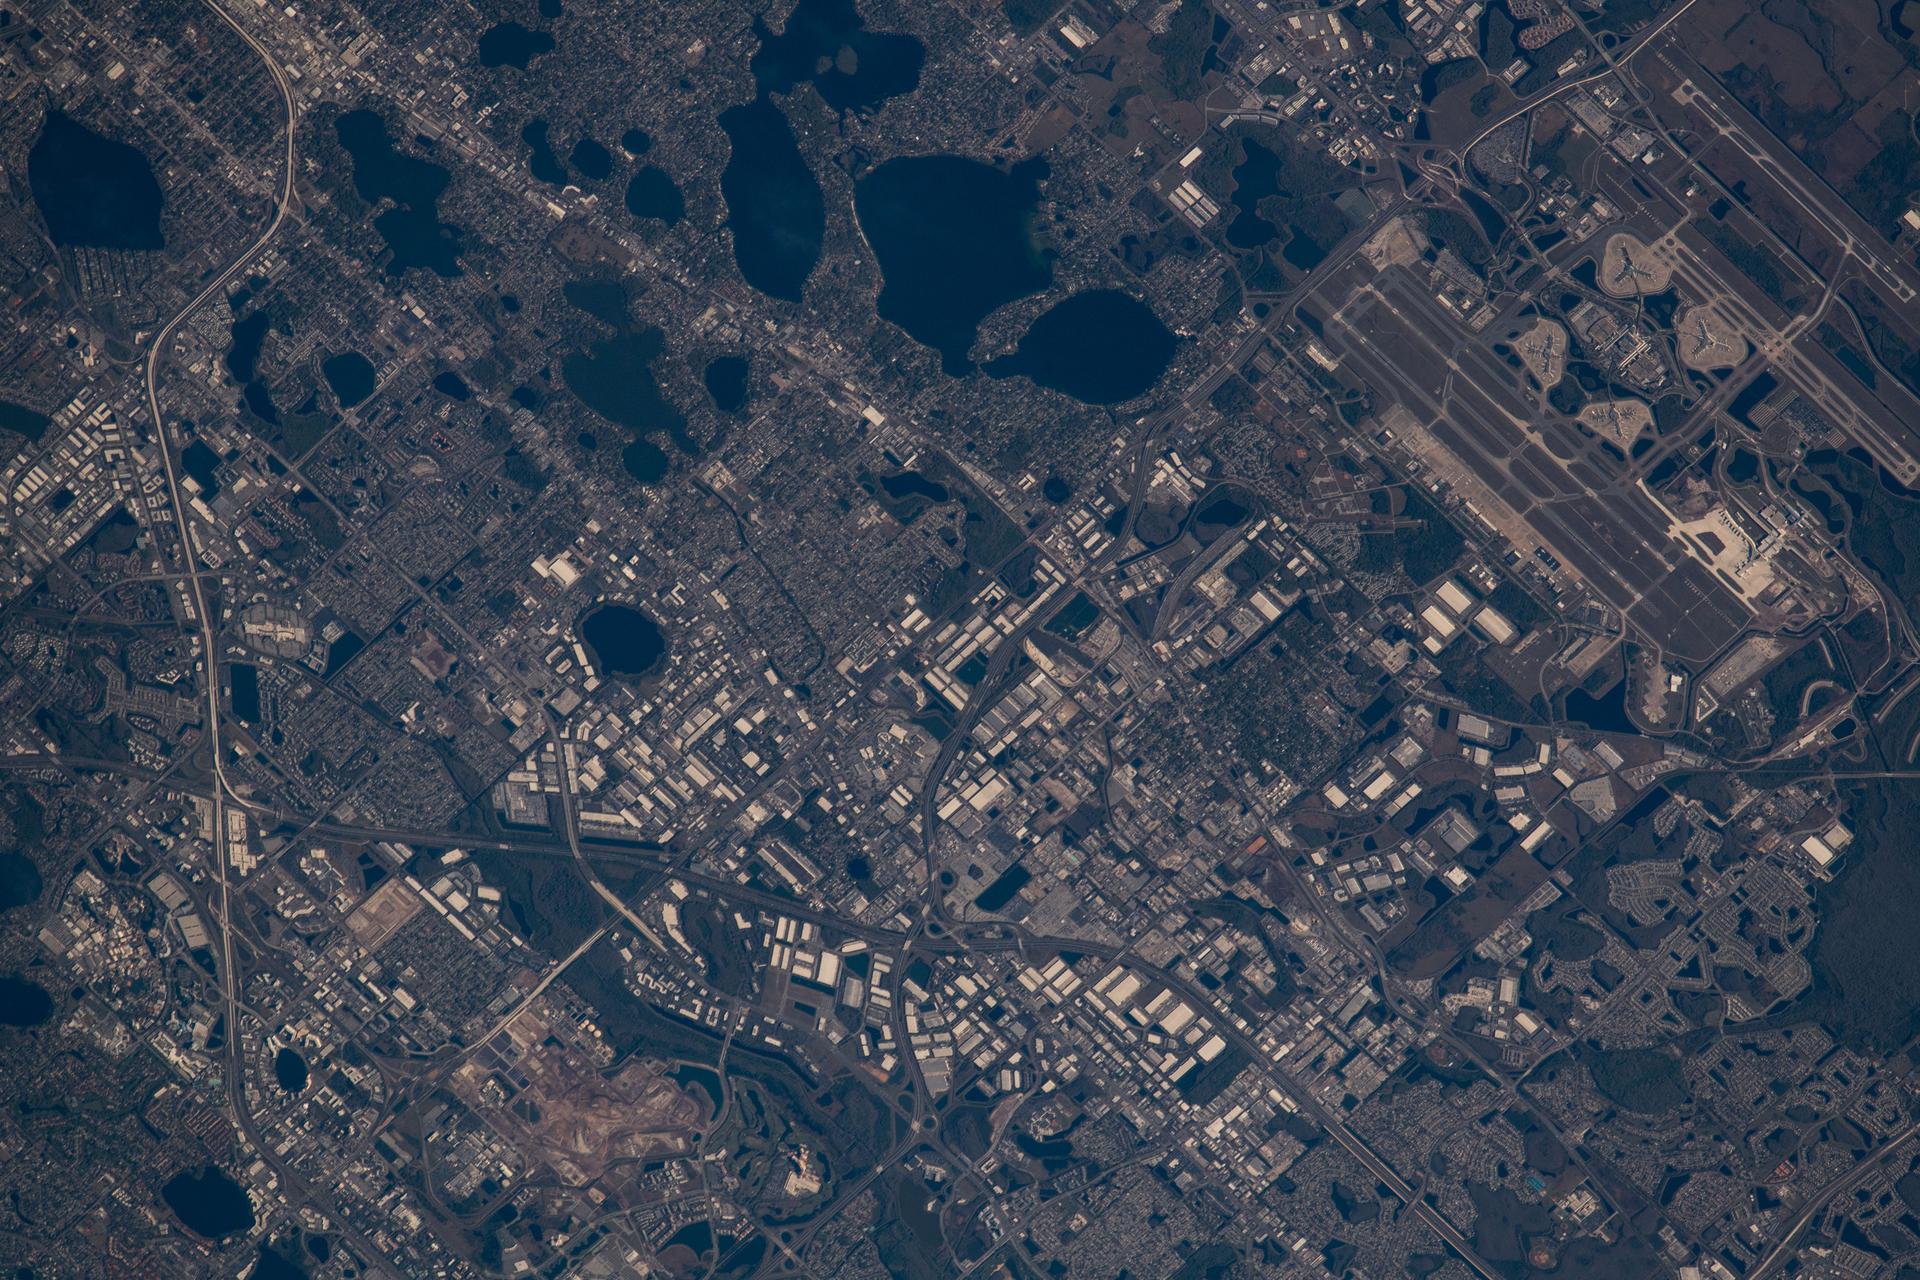 image of a city on Earth